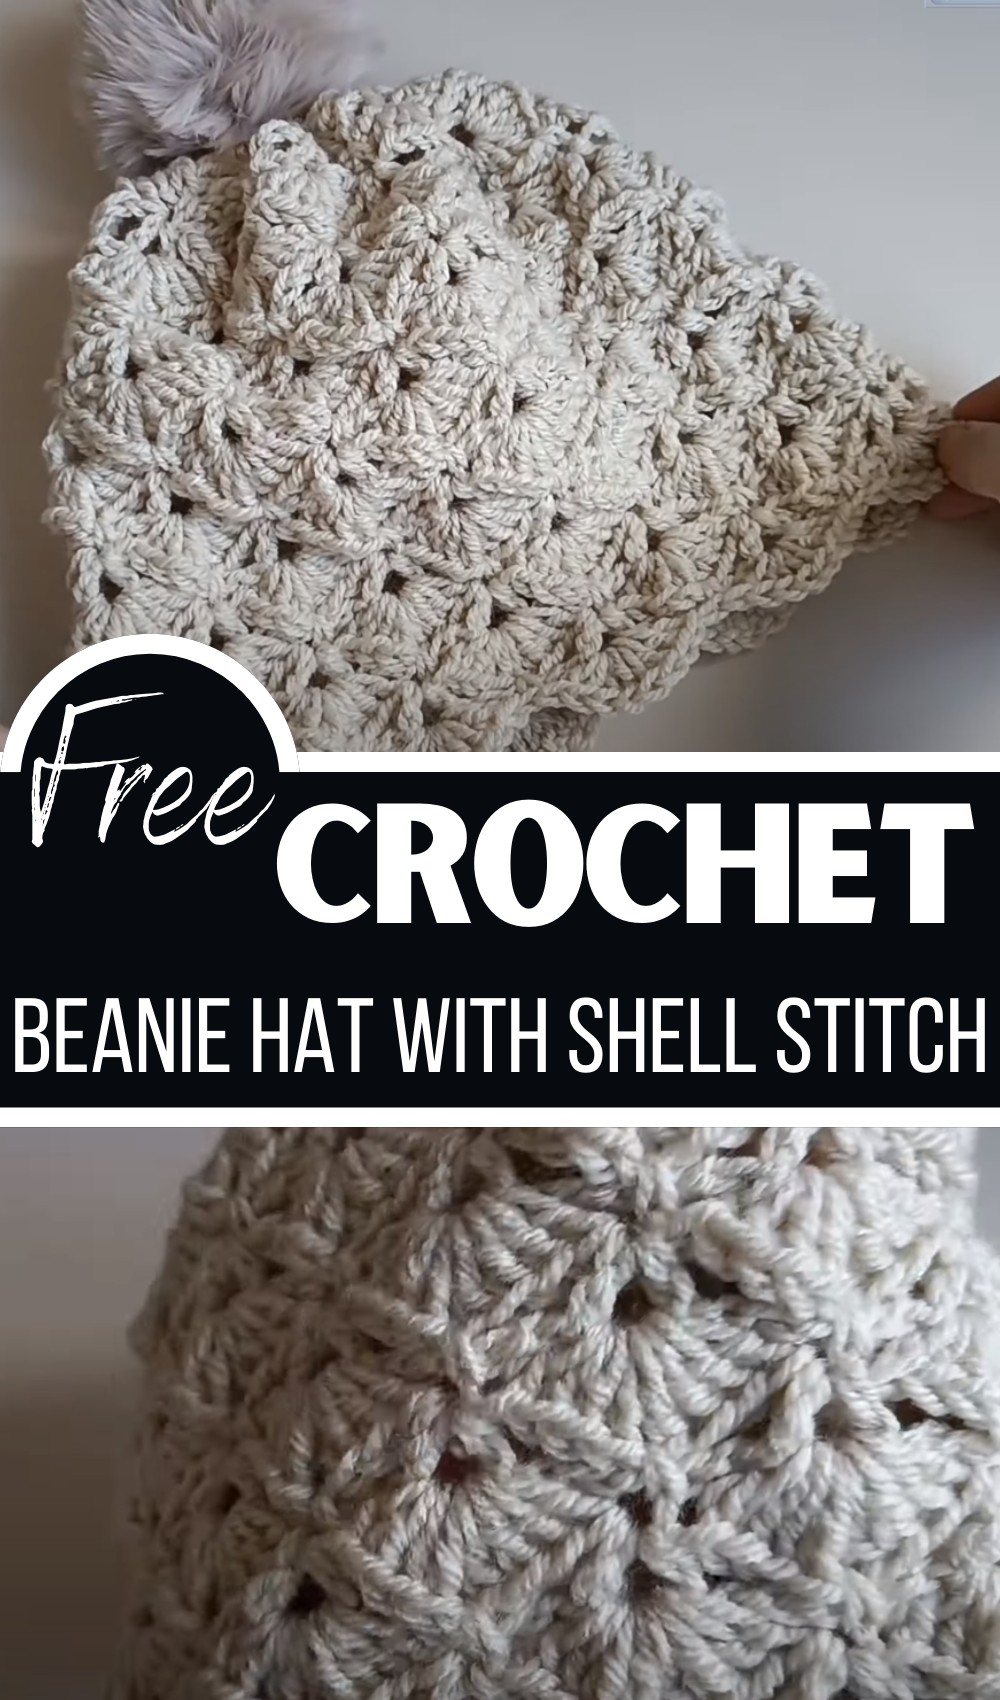 Beanie Hat With Shell Stitch Pattern